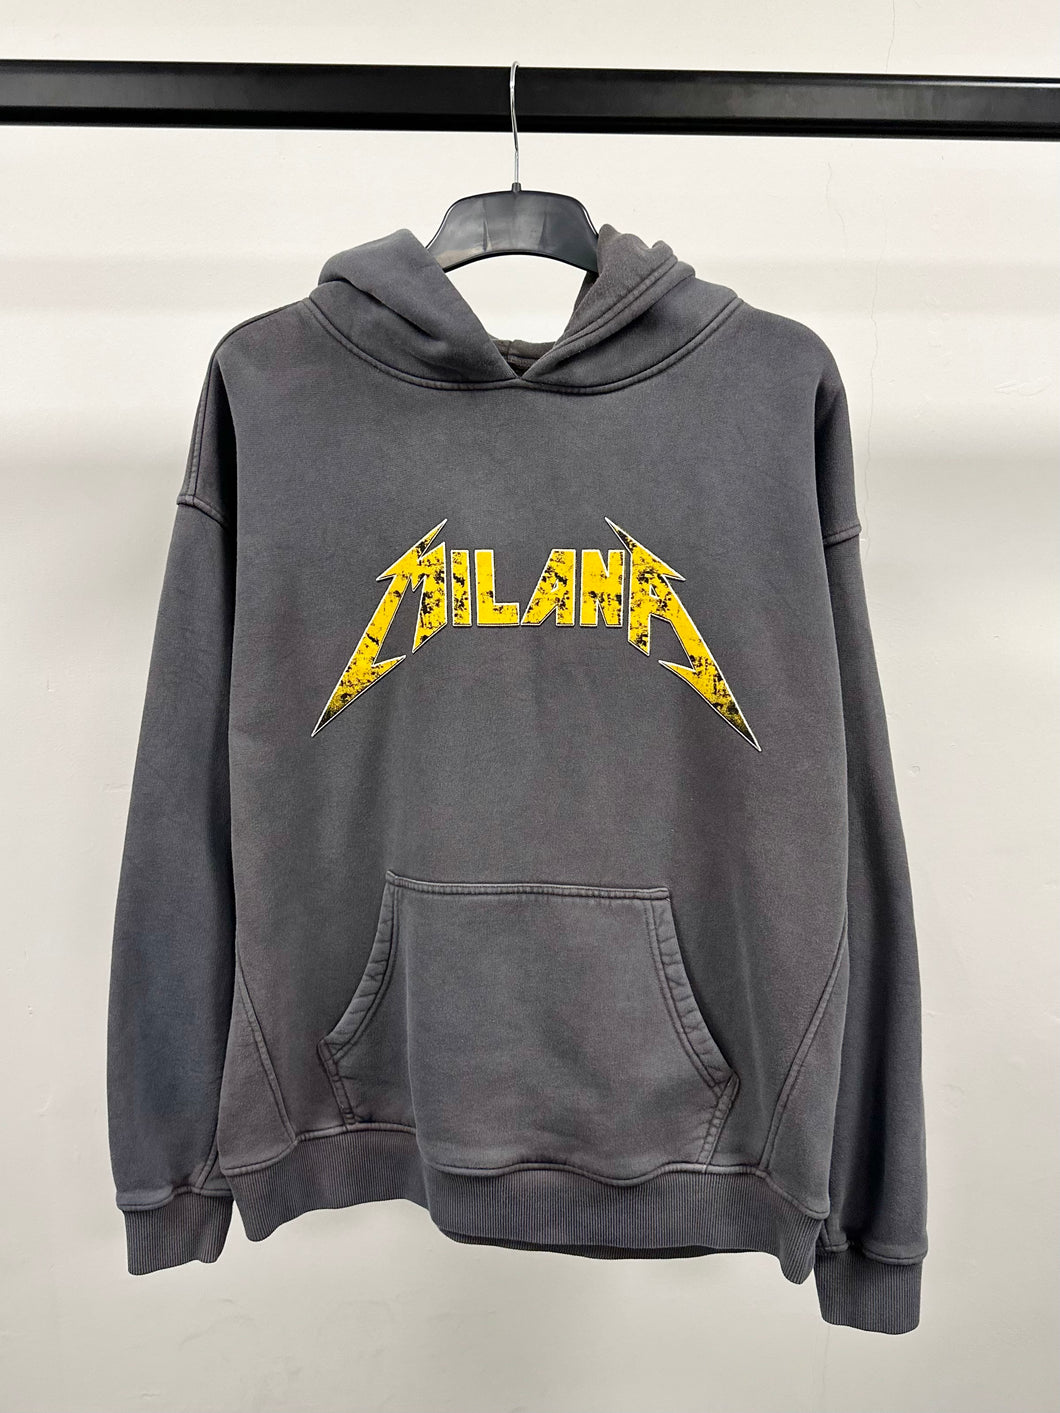 Washed Charcoal Milana Graphic Heavyweight Hoodie.